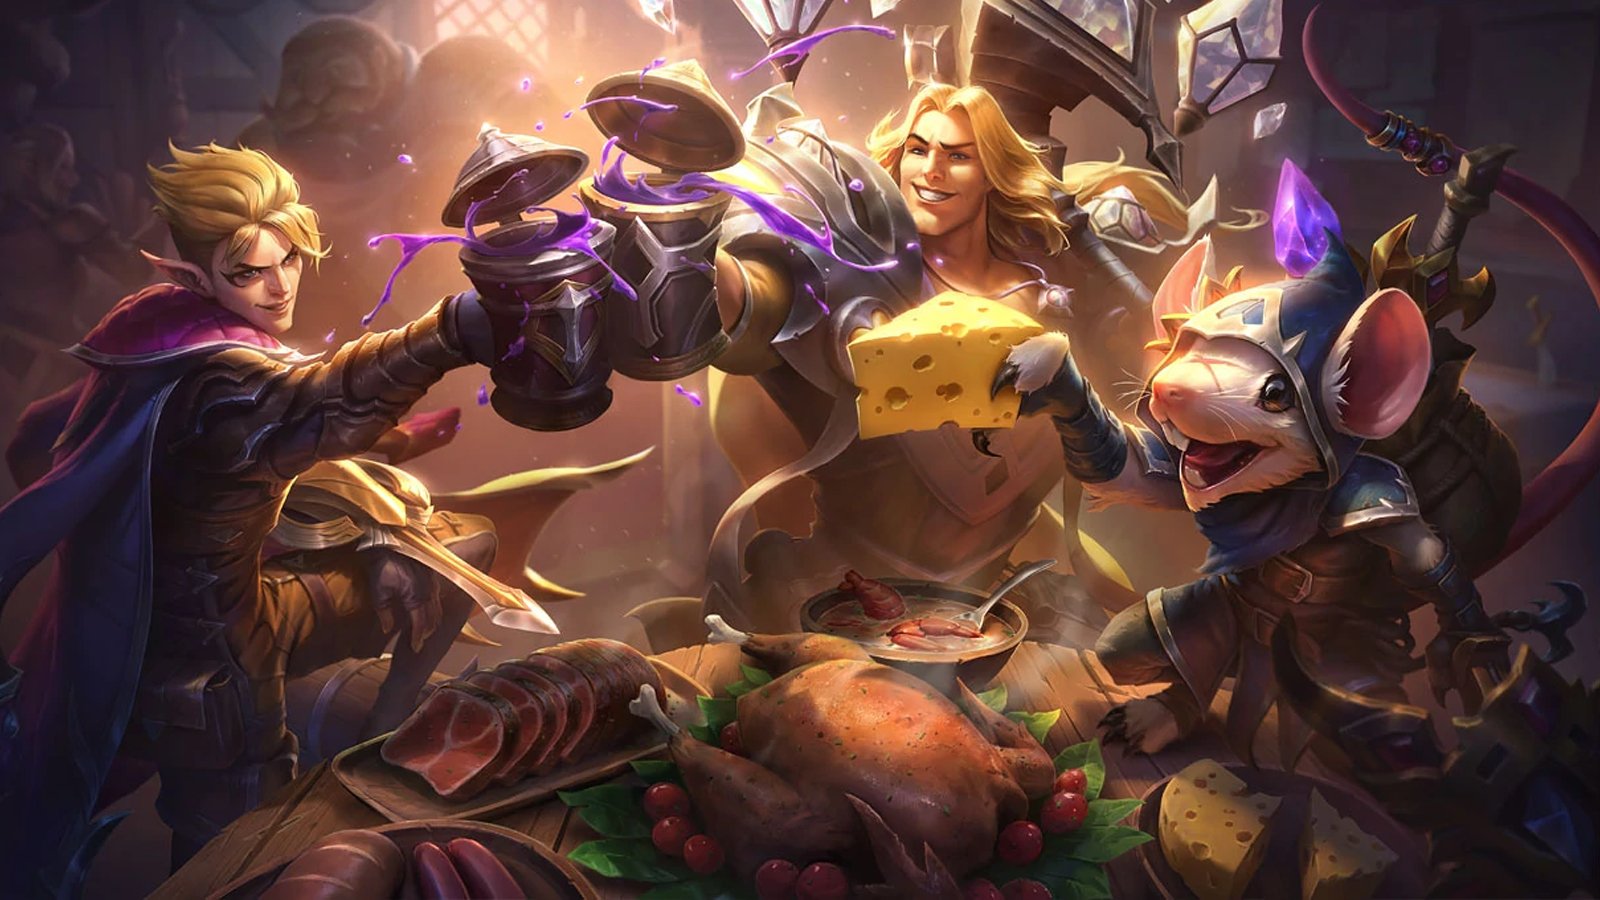 ‘More RNG’: Huge LoL Arena Patch 14.9 changes to combat ‘sweaty’ lobbies